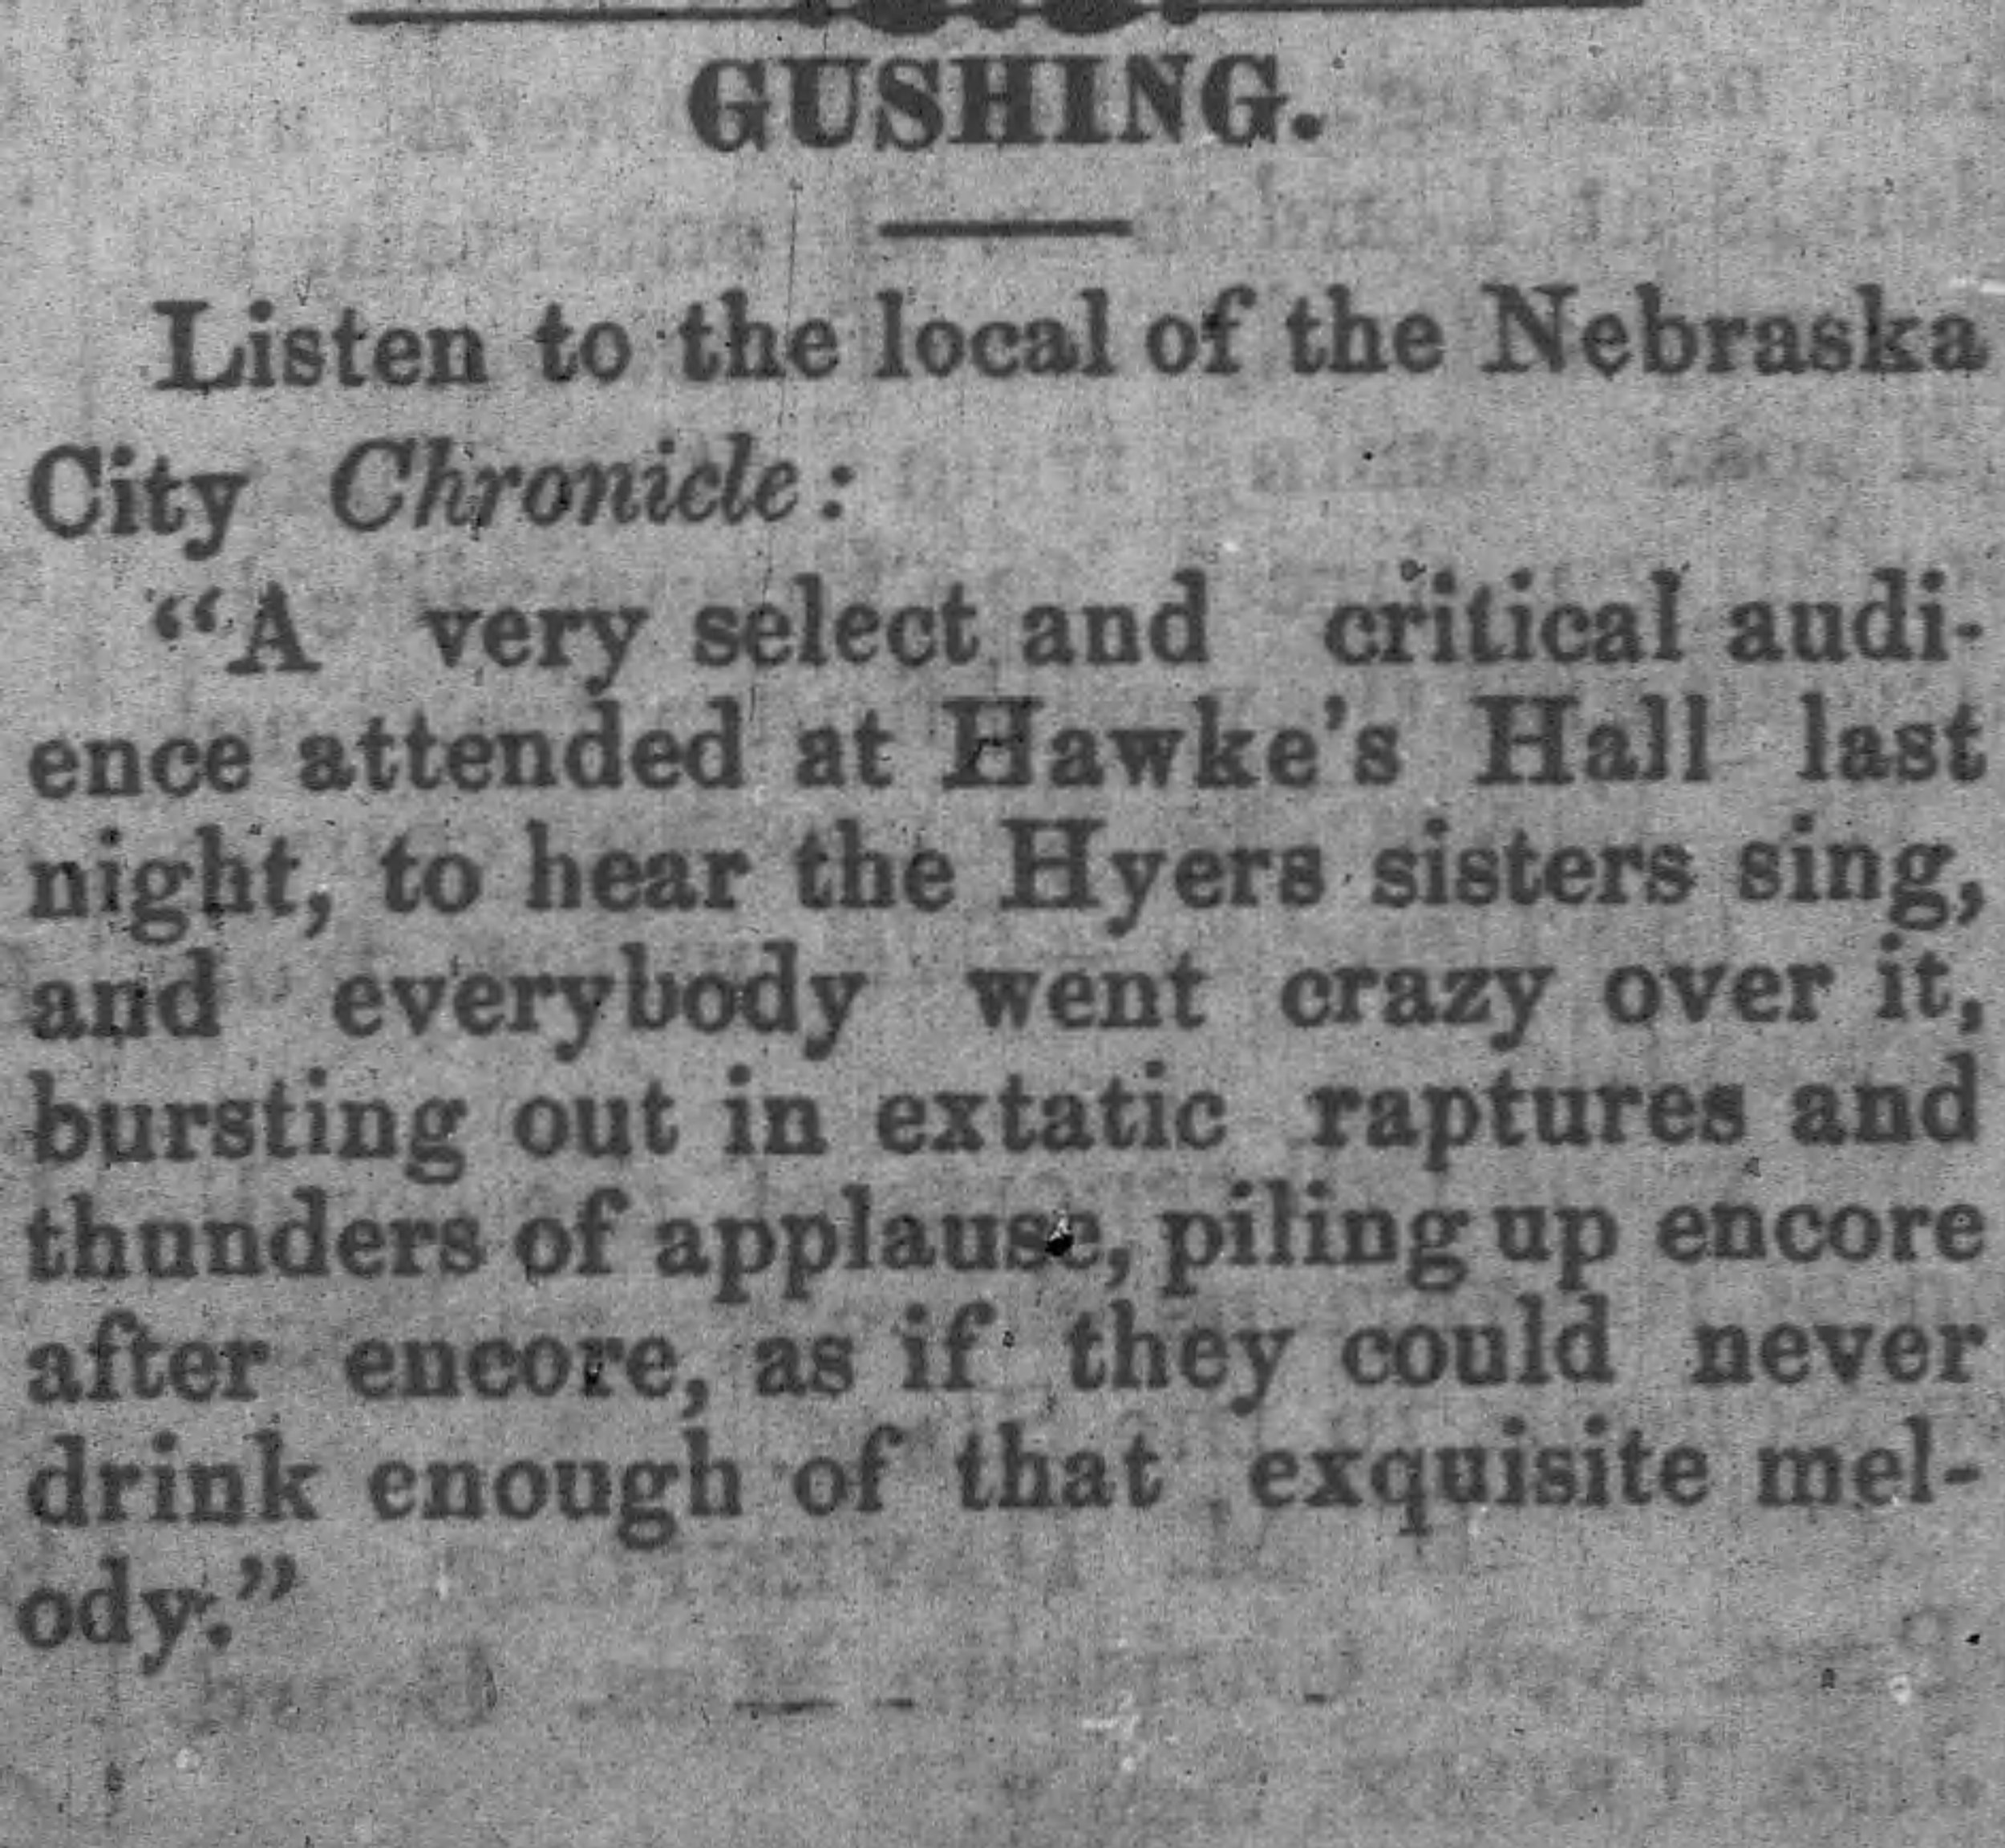 04_1871-09-02 The Beatrice (NE) Express_Hyers (gushing review).jpg